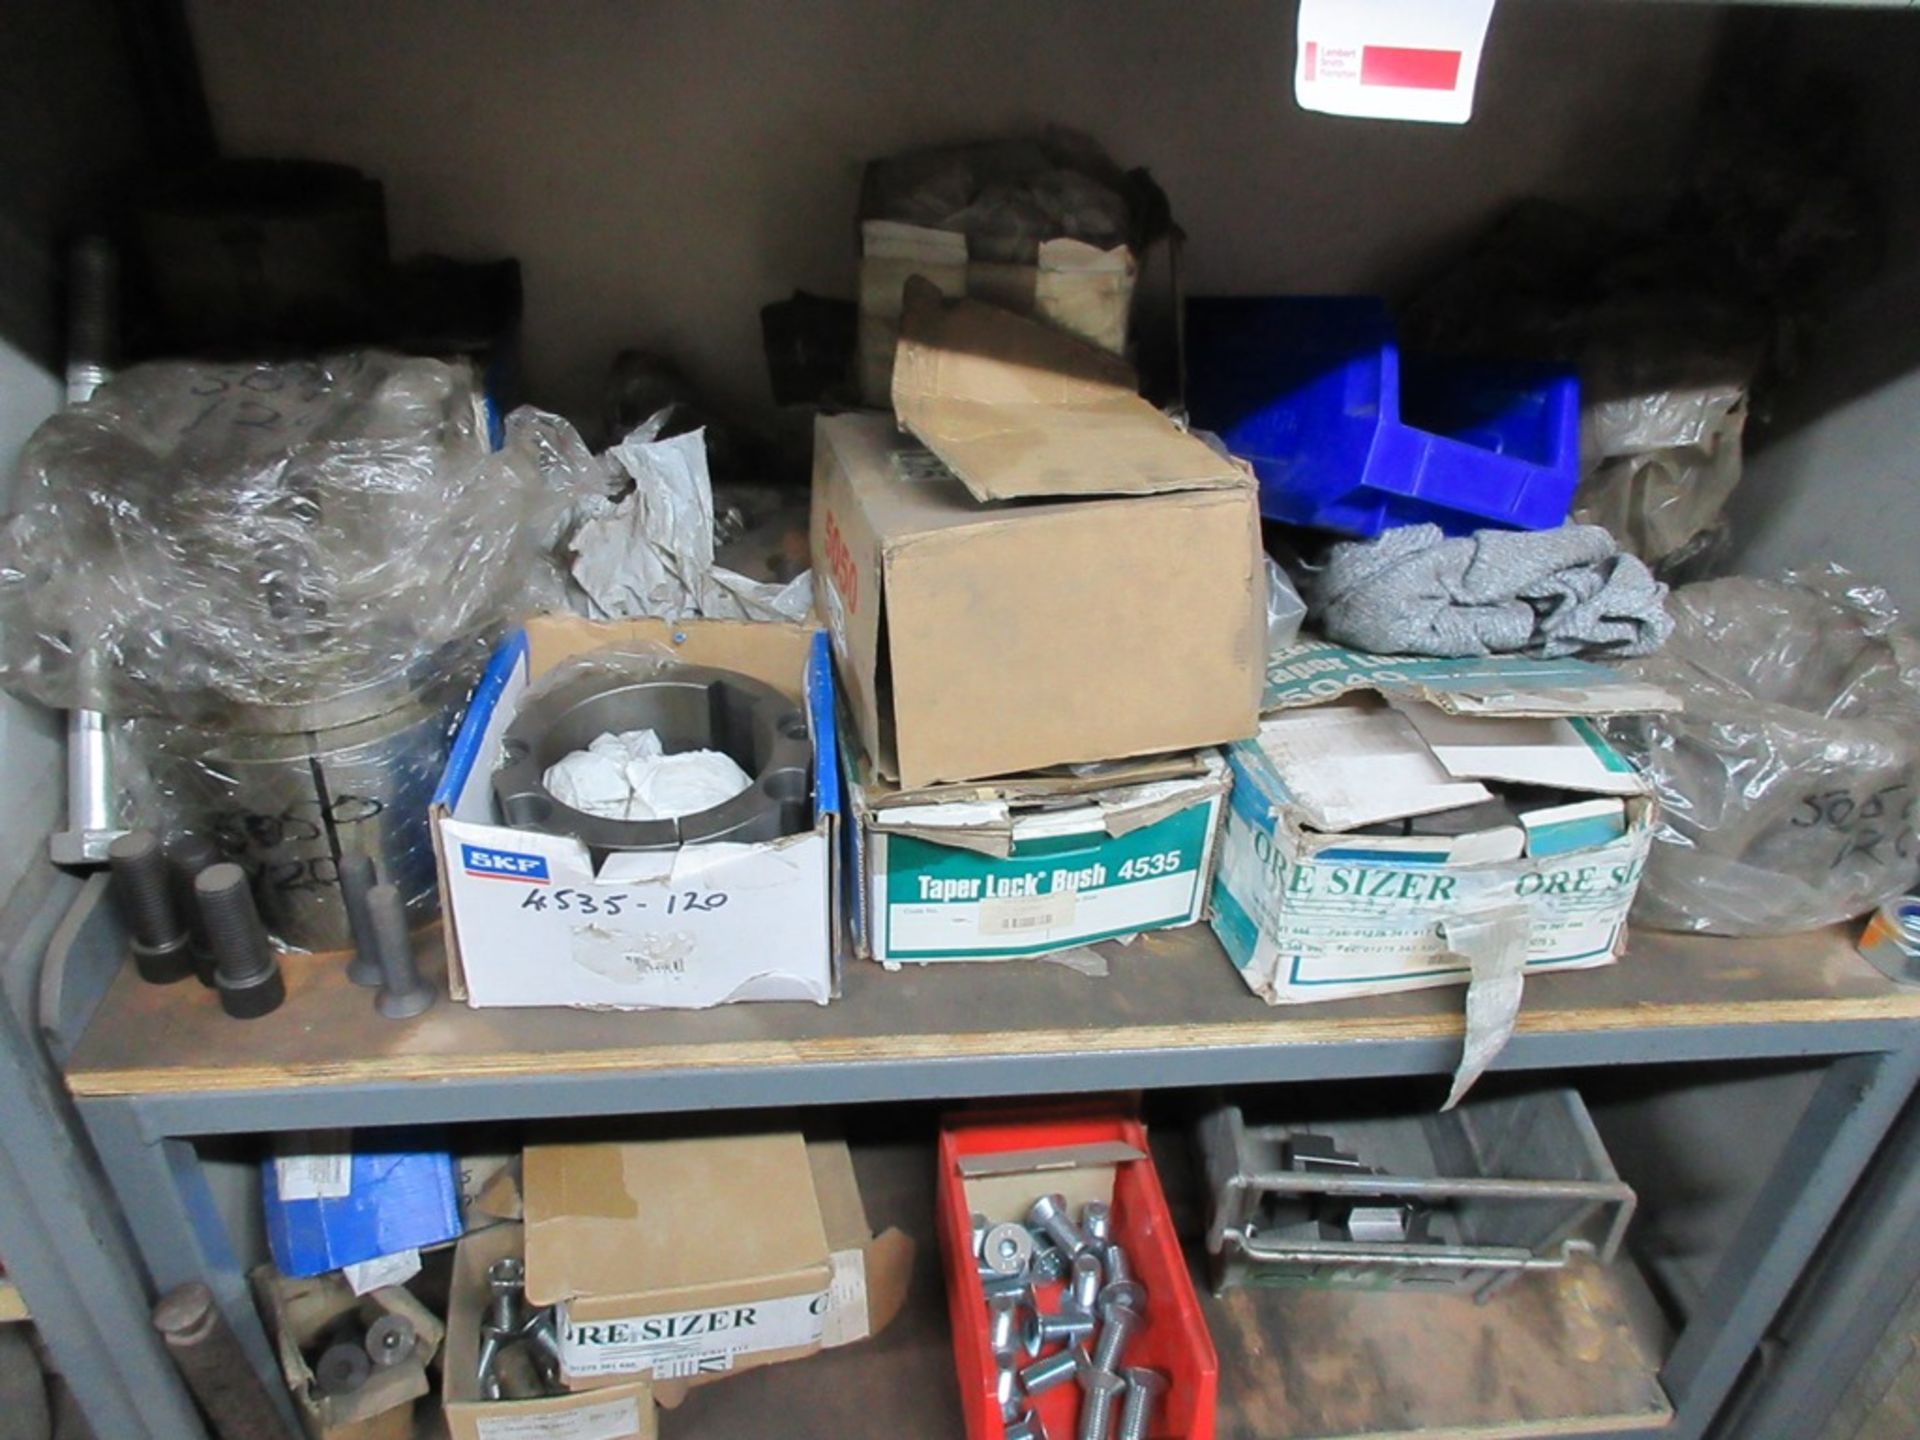 Bay of assorted stock to include assorted steel bushes, screws, sockets, bolts etc. - Image 3 of 4